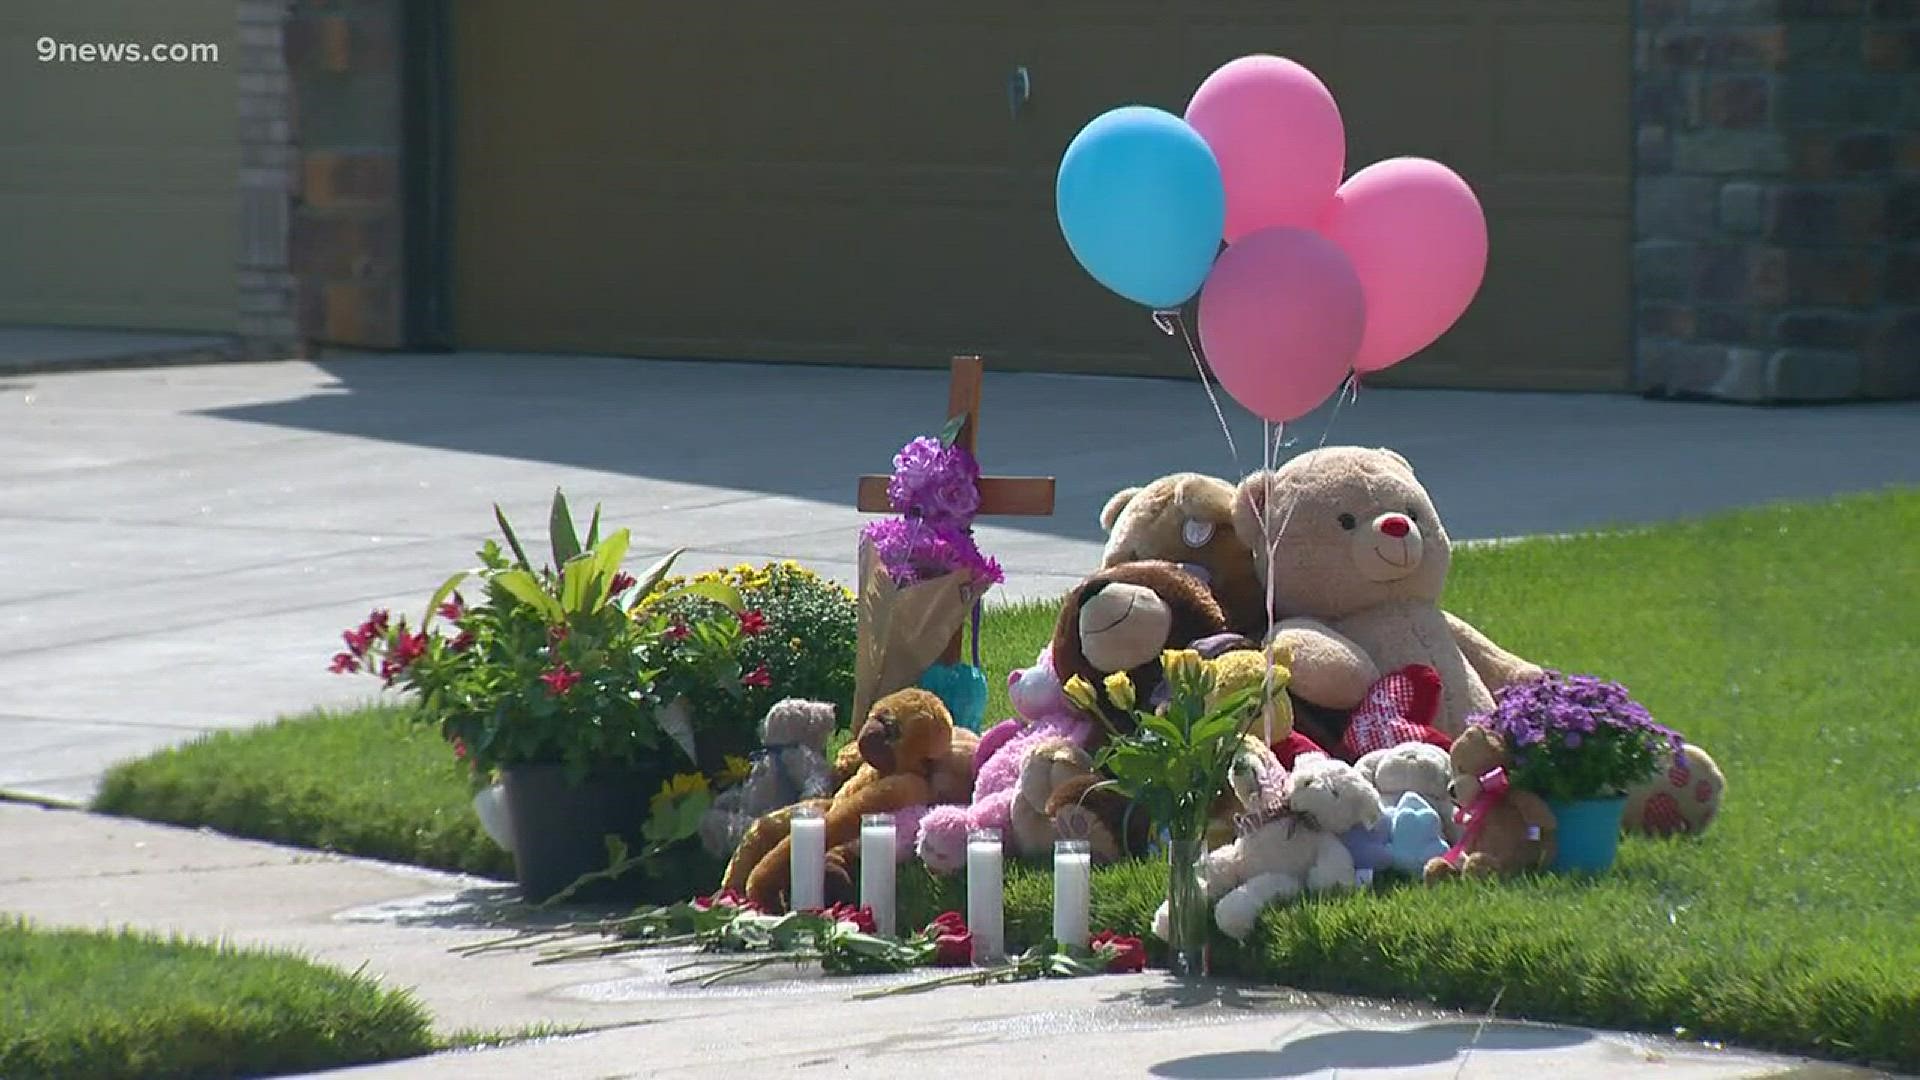 In the days after the murders of Shanann Watts and her two young daughters, a memorial appeared in front of their home in Frederick. It grew with mementos left by friends, neighbors and strangers. One of those strangers got an idea.